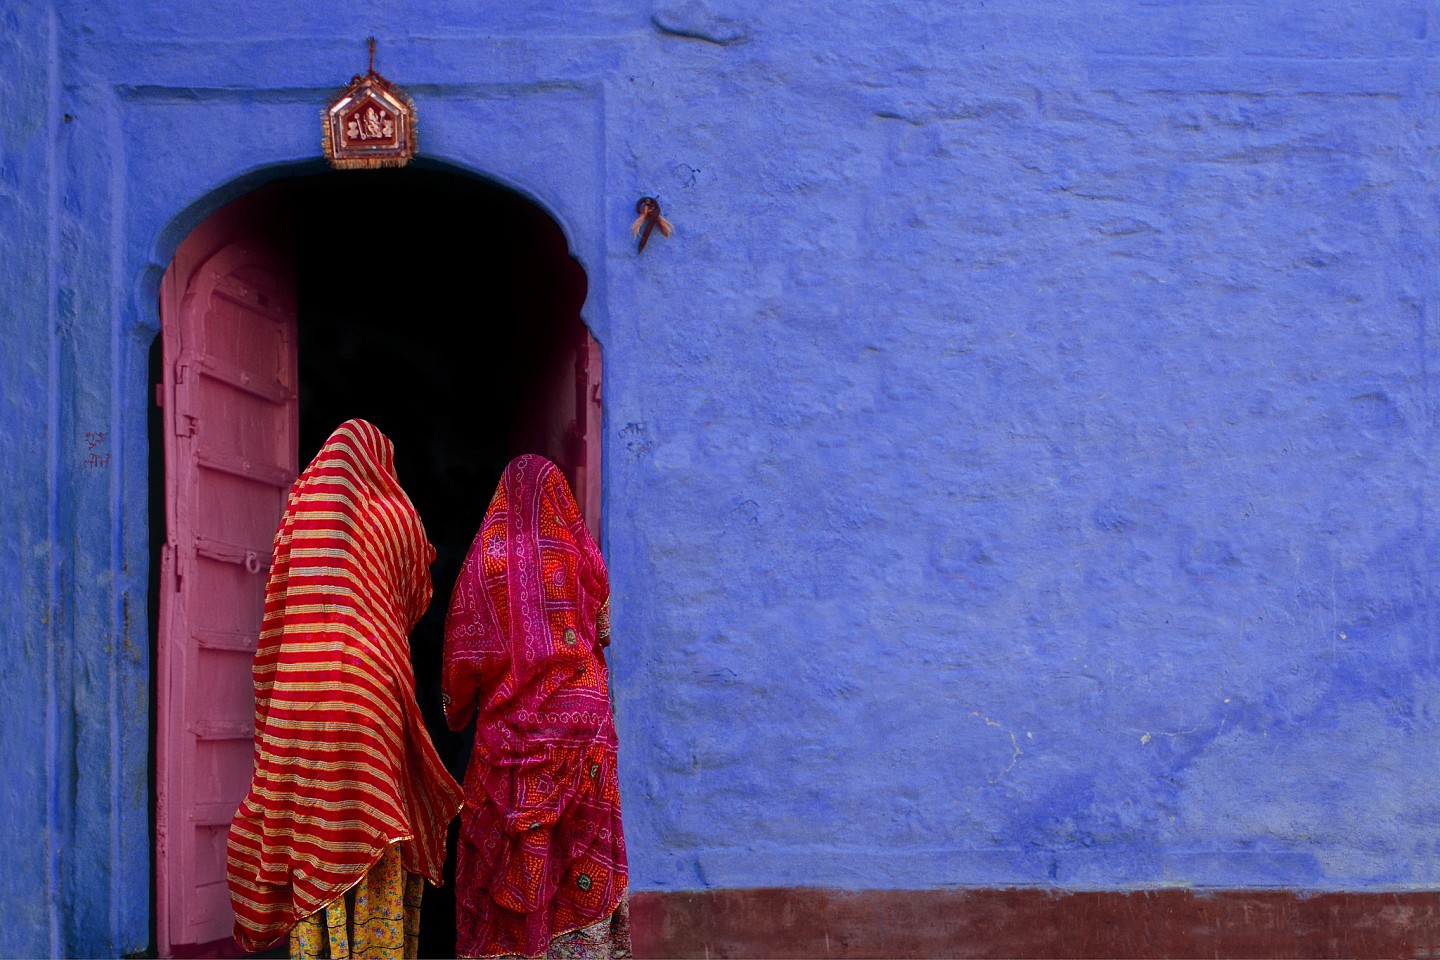 Jeffrey Becom, Pink Door, Jaisalmer, Rajasthan, India, 2008
Pigment inkjet print, 16 x 24 in.
Signed, dated, titled & numbered in edition of 25, © Jeffrey Becom
$1,500